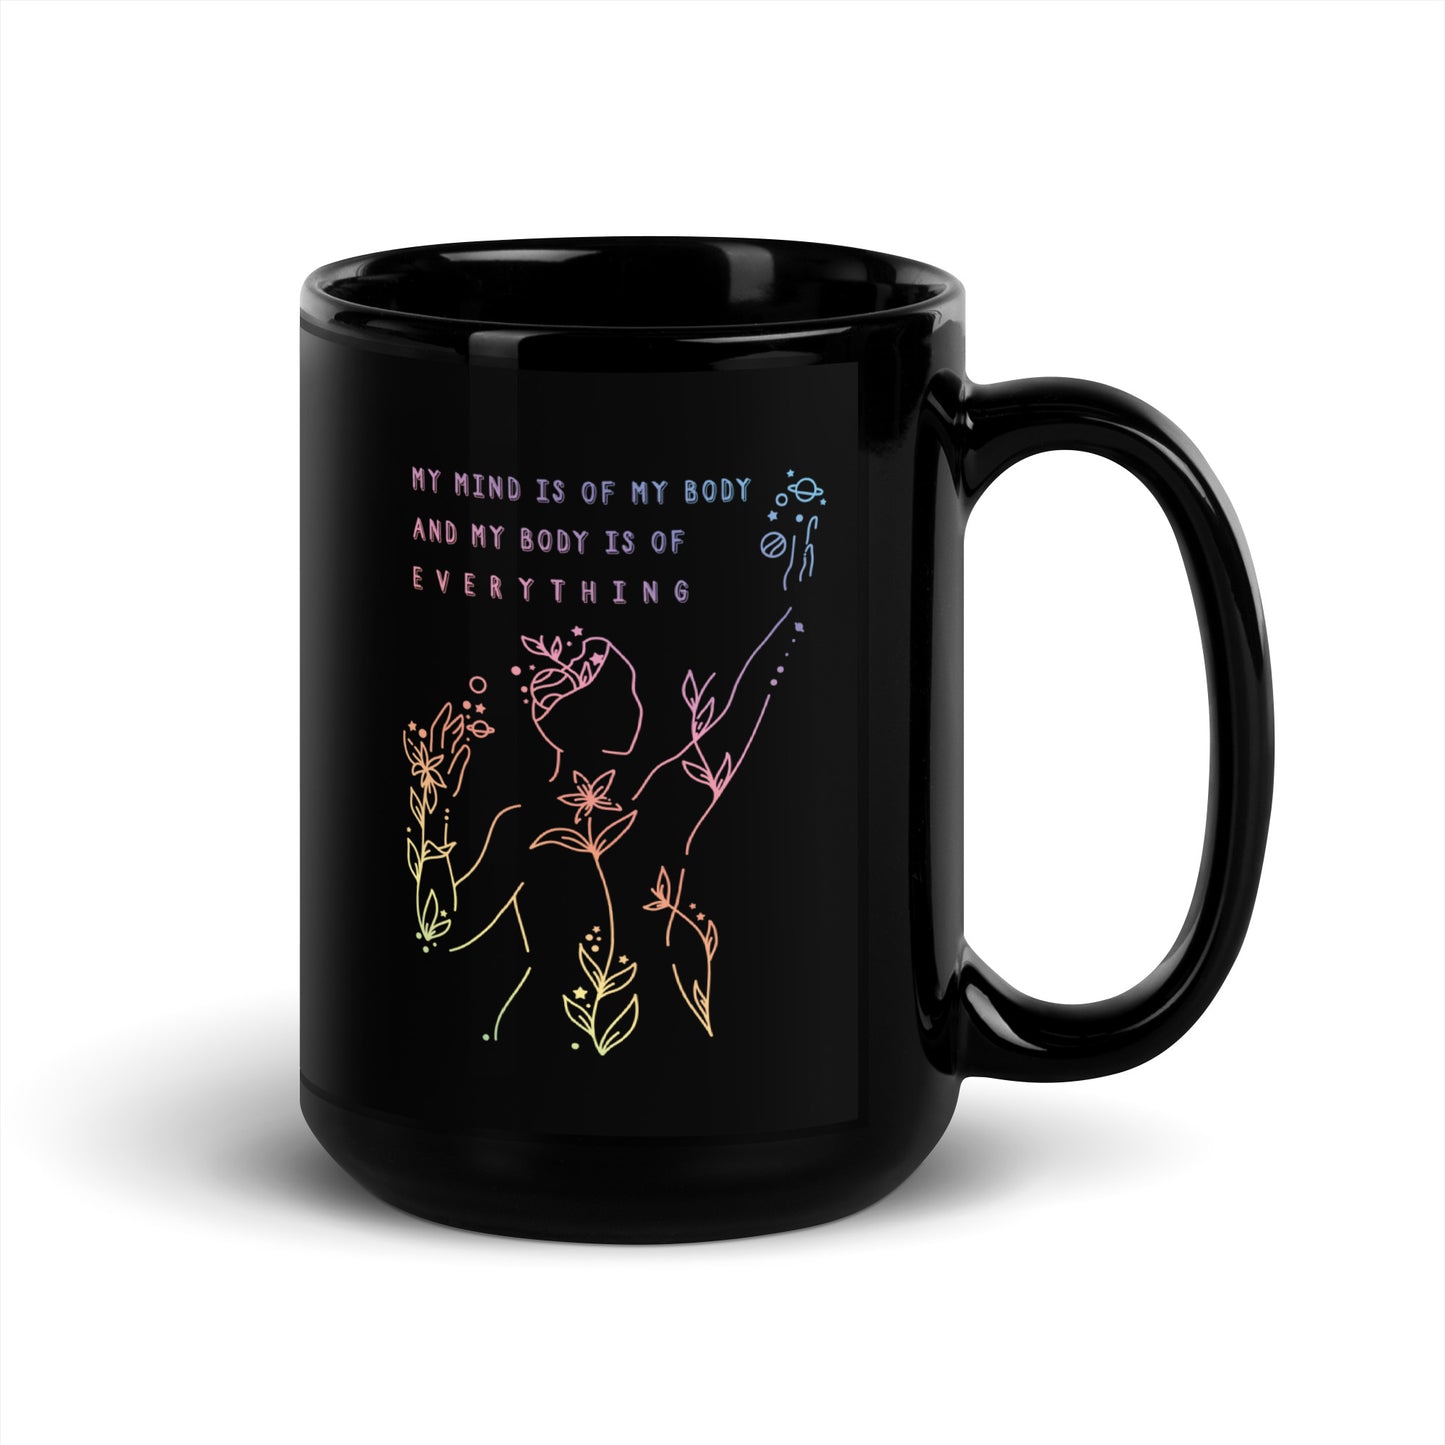 A black 15 ounce coffee mug featuring an abstract illustration of a figure whose body is spreading out into plants and planets and stars. Text above the figure reads "My mind is of my body and my body is of everything."